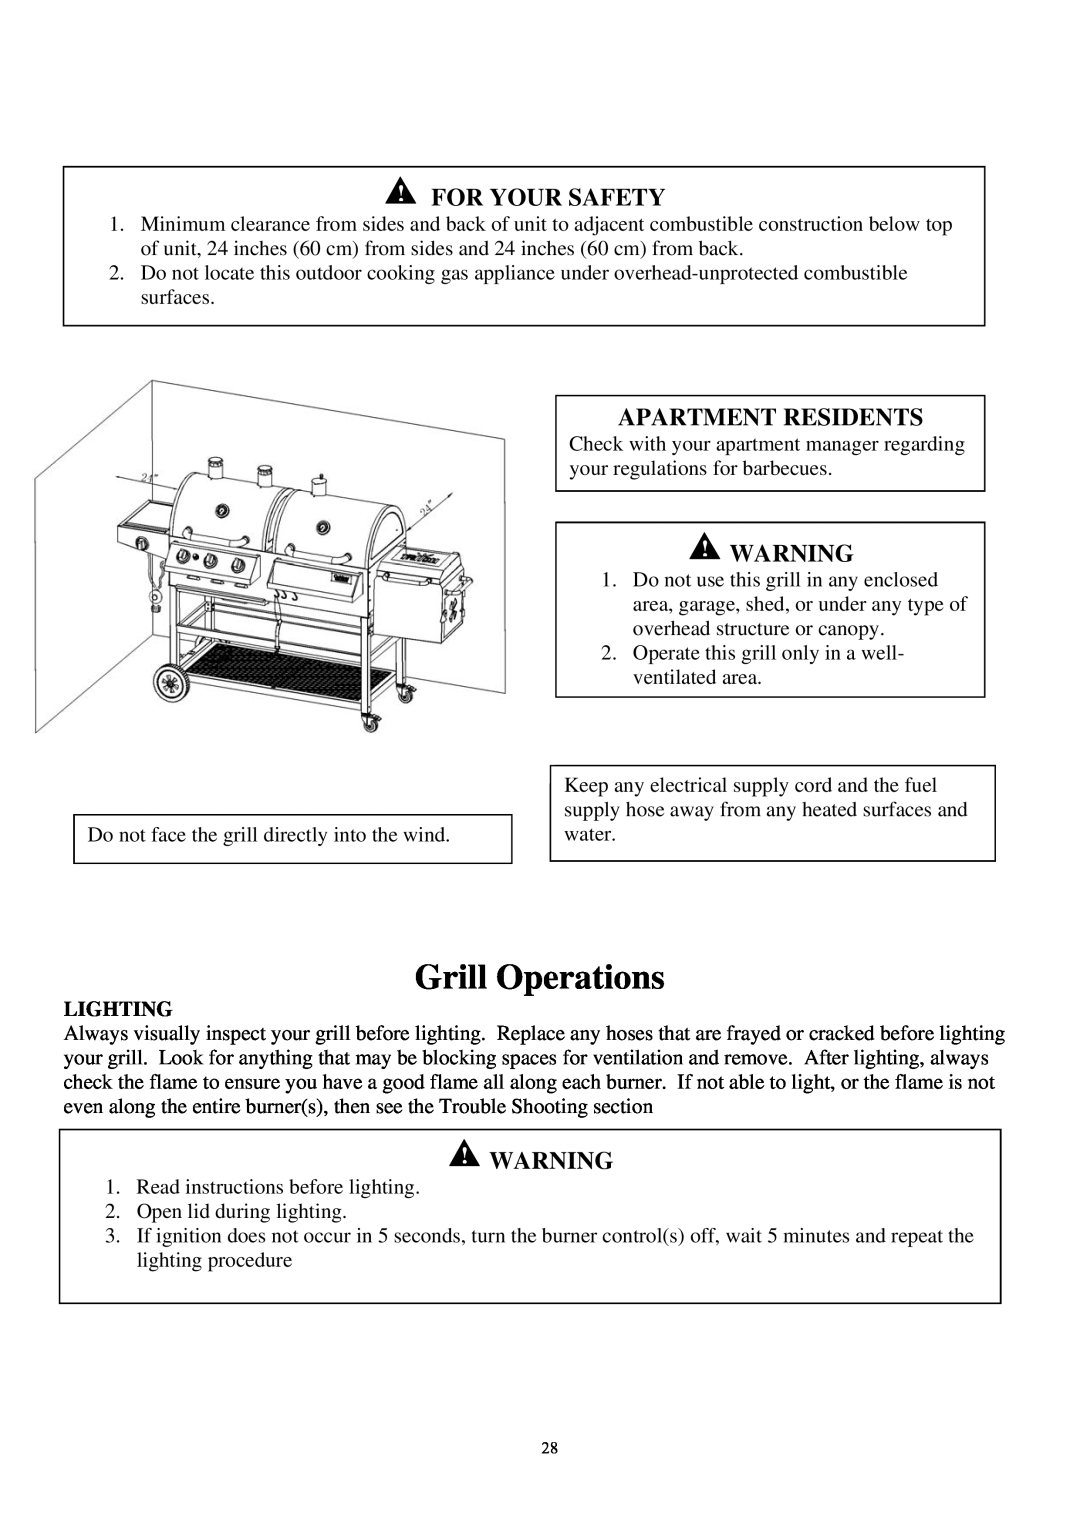 Outdoor Gourmet CG3023E instruction manual Grill Operations, For Your Safety, Apartment Residents, Lighting 